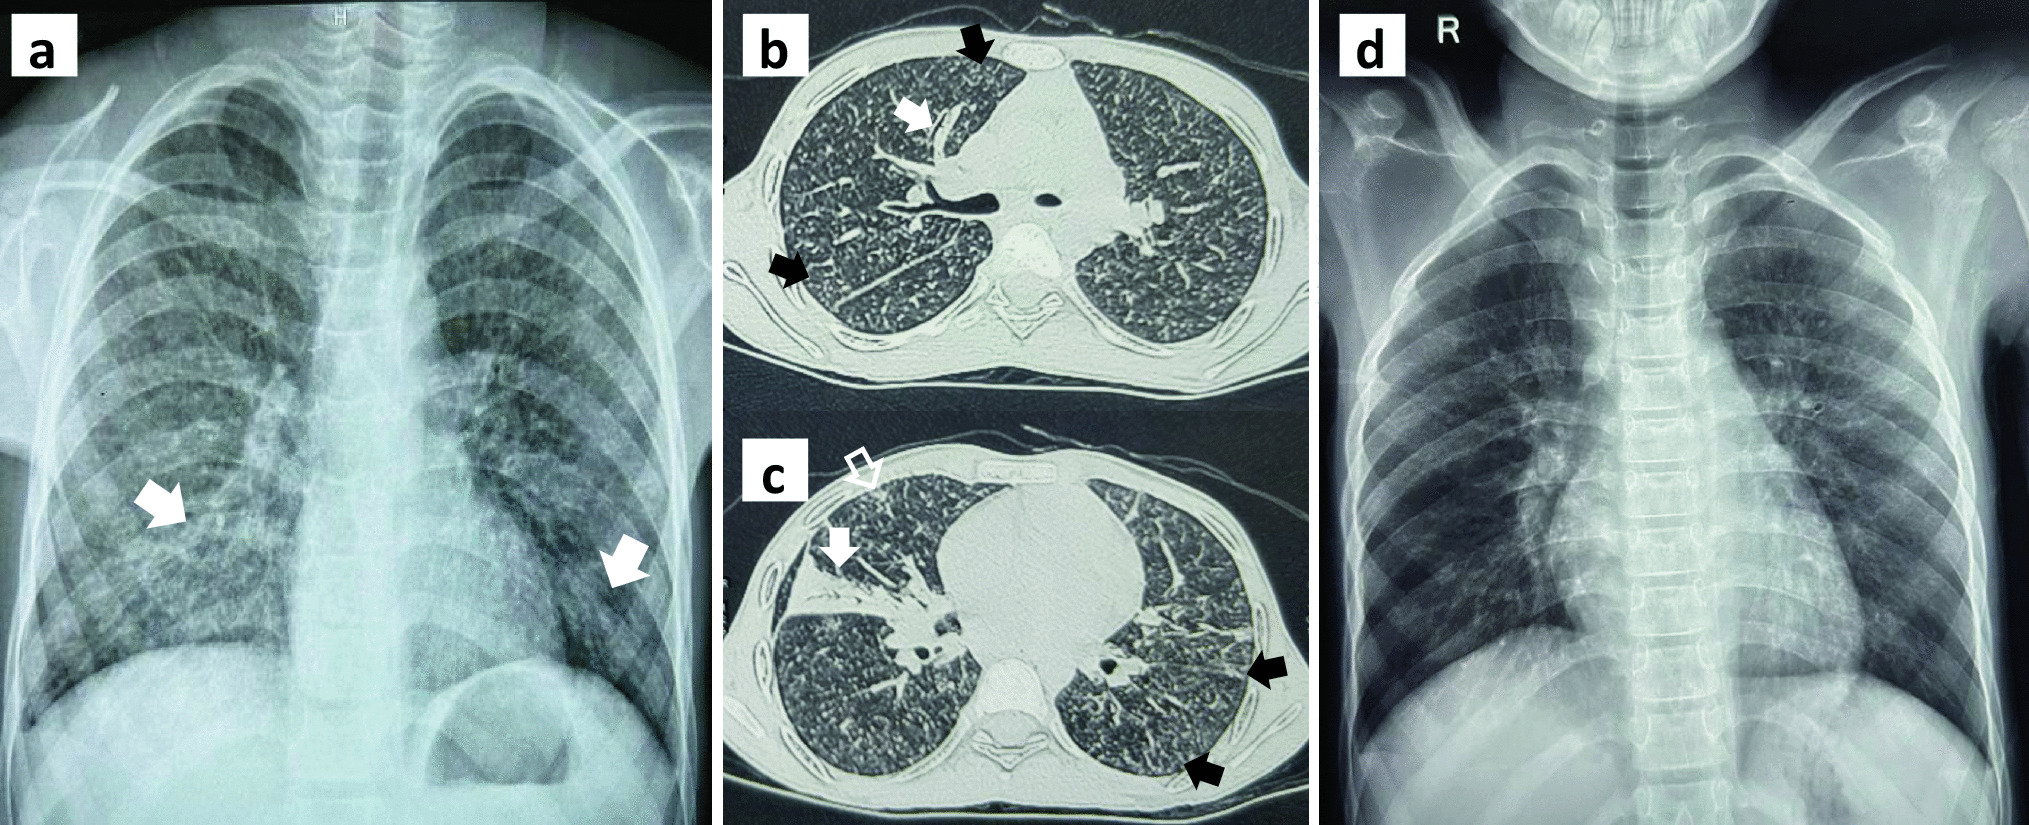 Cough, Eosinophilia and Lung Nodules in a Family – Infection, Infestation or Inheritance?